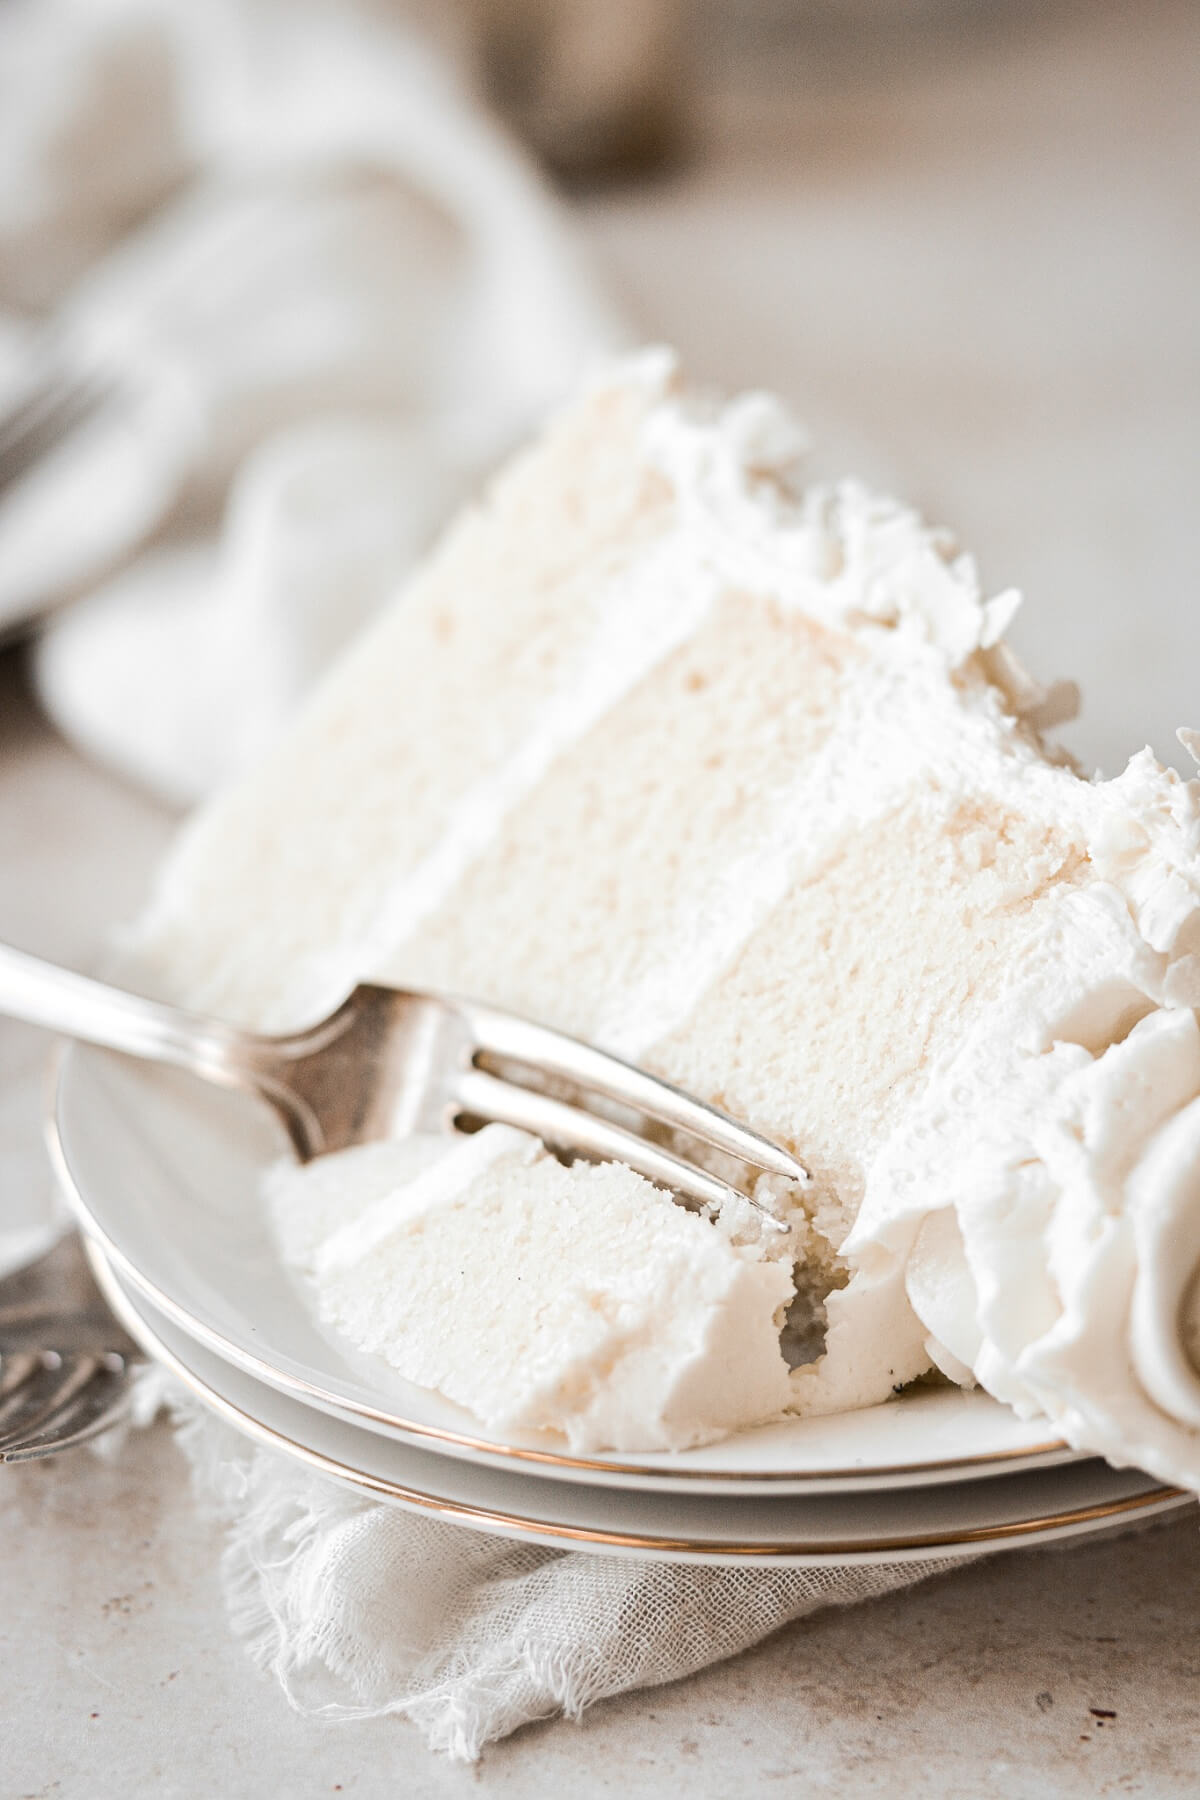 Slice of coconut cake with a bite taken.